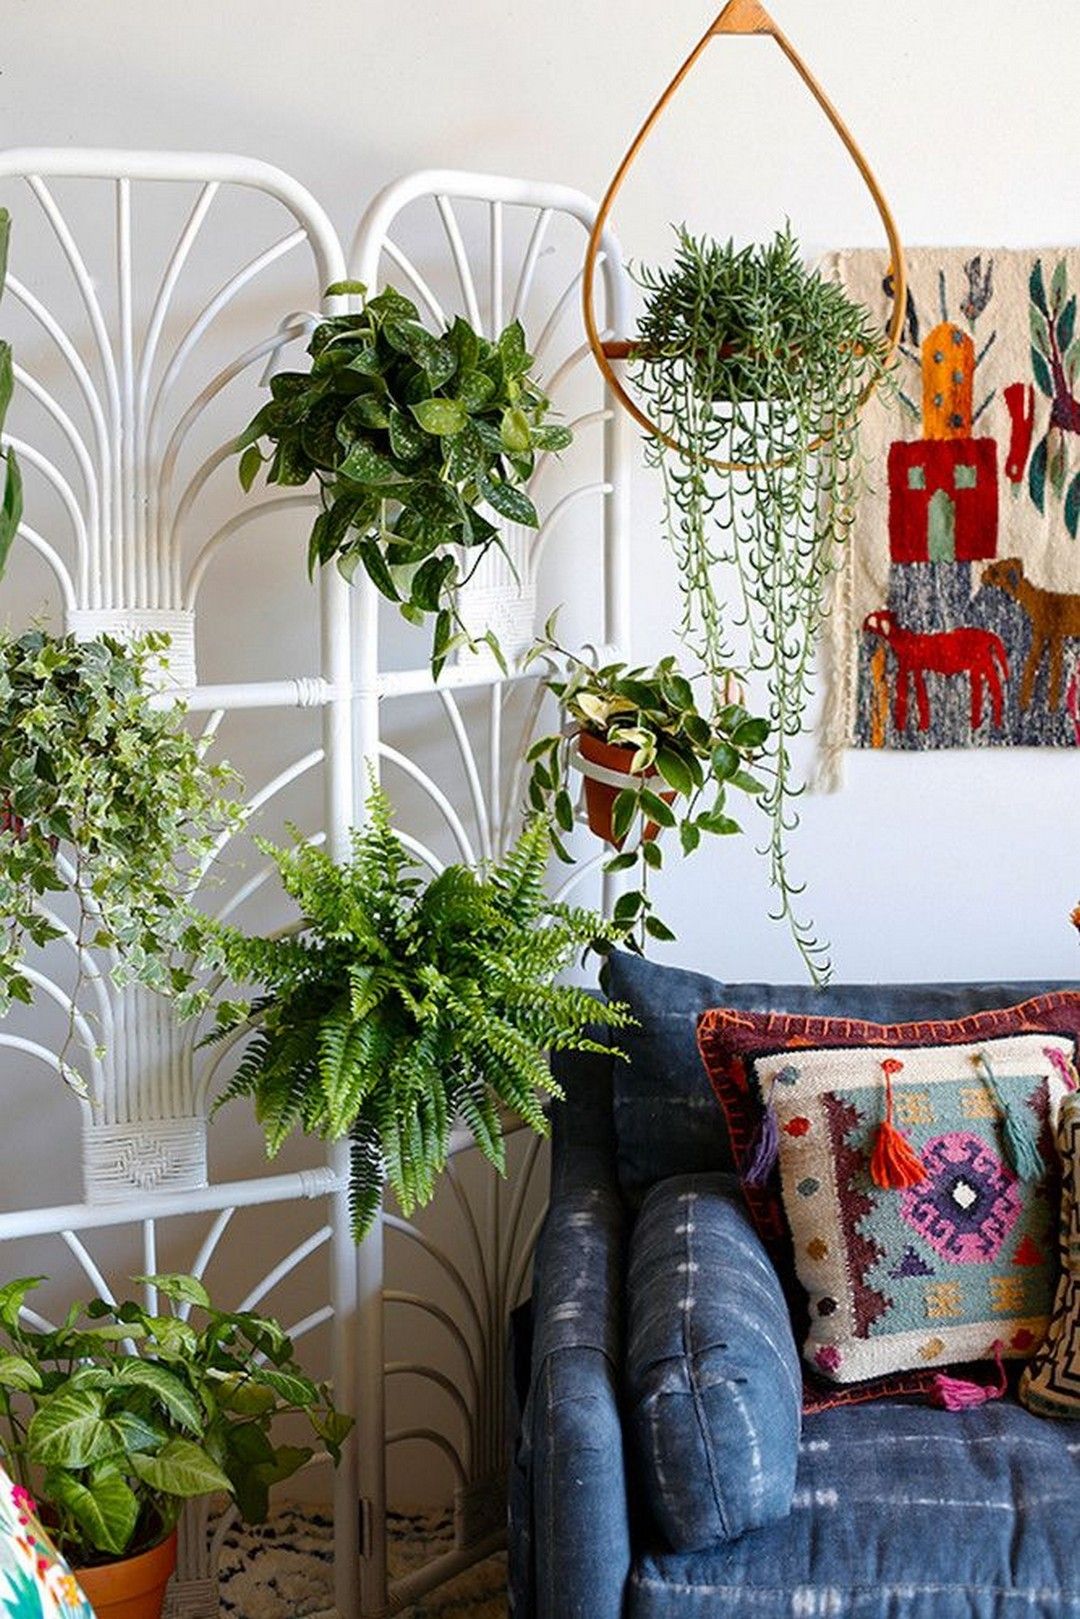 12 Indoor Plants For A Vibrant Home Decor